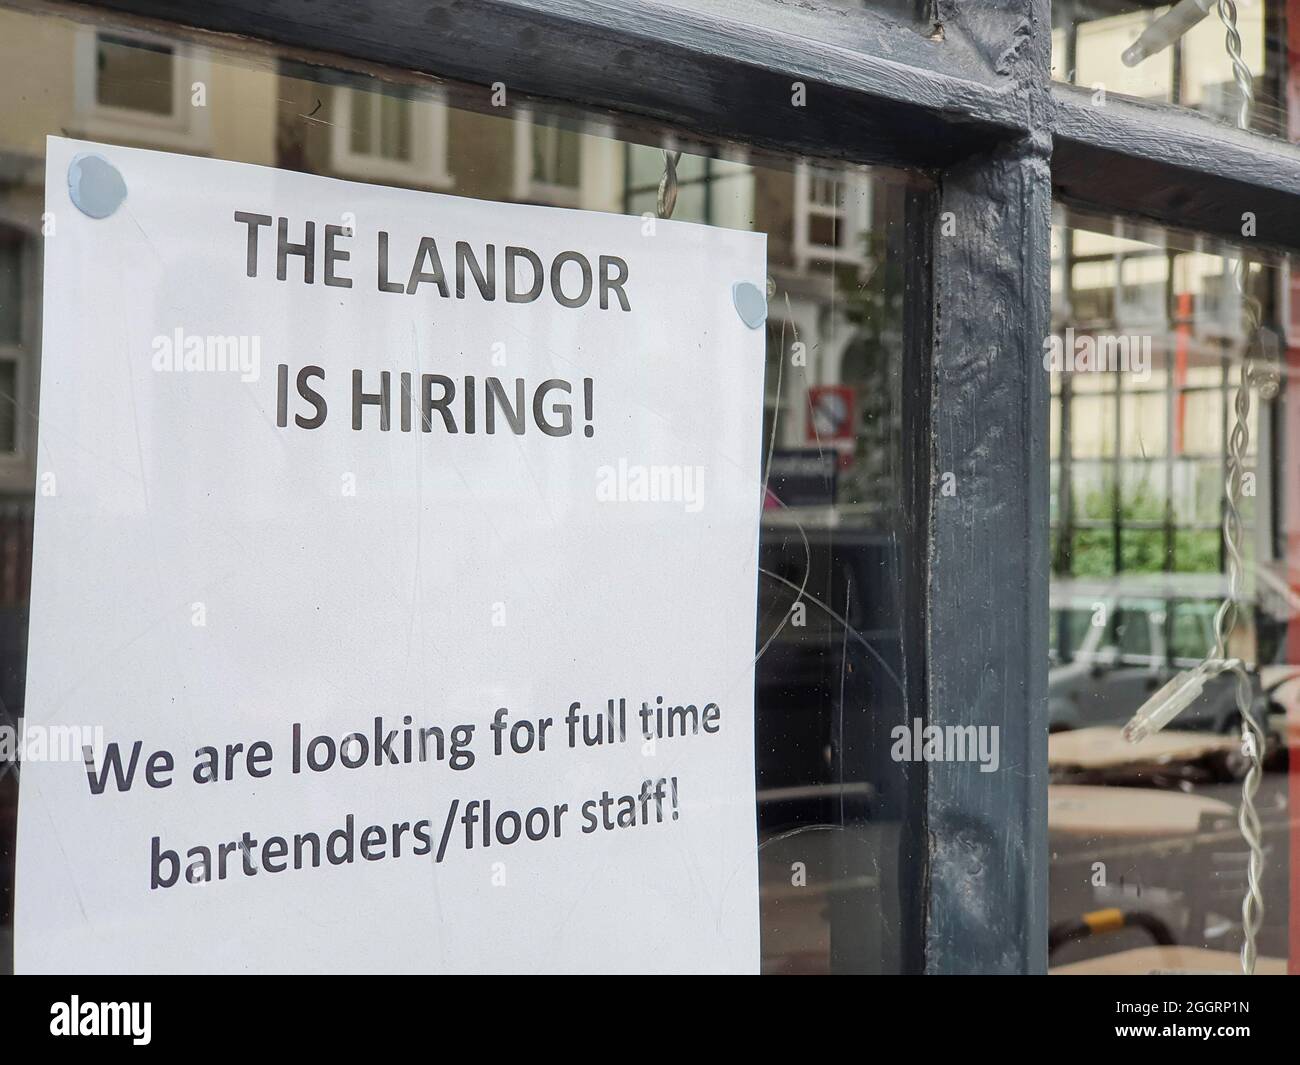 London, UK, 2 September 2021: a sign in a pub window in Clapham advertises a job vacancy for bar staff. The hospitality sector is one of several sectors that have been hit badly by both Brexit and the pandemic, leaving 1.66 million jobs unfilled in the UK. Anna Watson/Alamy Live News Stock Photo